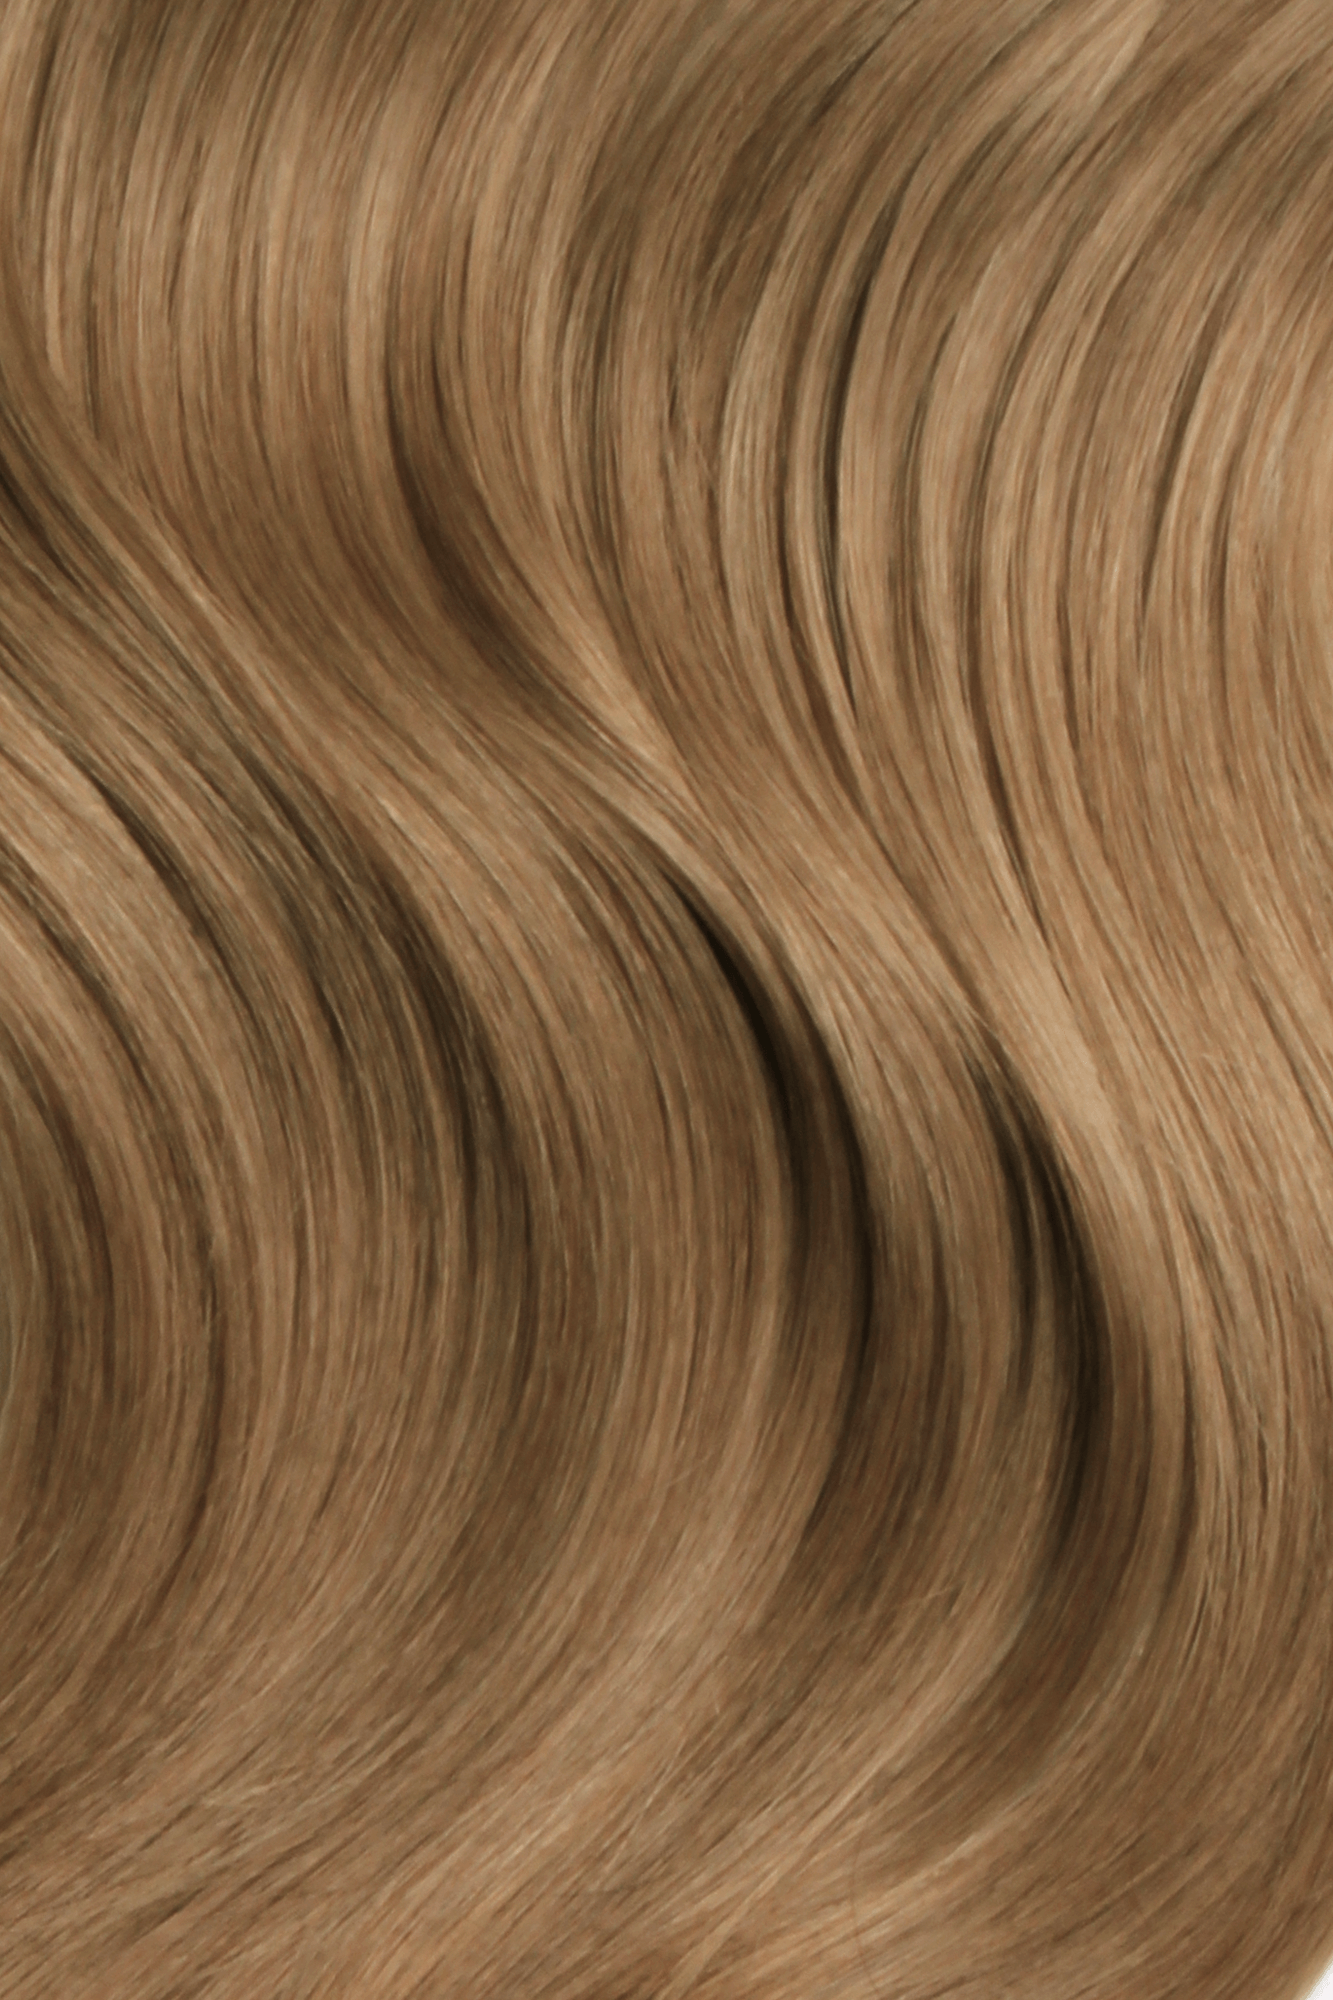 Nano Bonds 22 Inches - SWAY Hair Extensions Sunkissed-Brown-8-10 Ultra-fine, invisible bonds for a flawless, natural look. 100% Remy Human hair, lightweight and versatile. Reusable and perfect for individual or salon use.